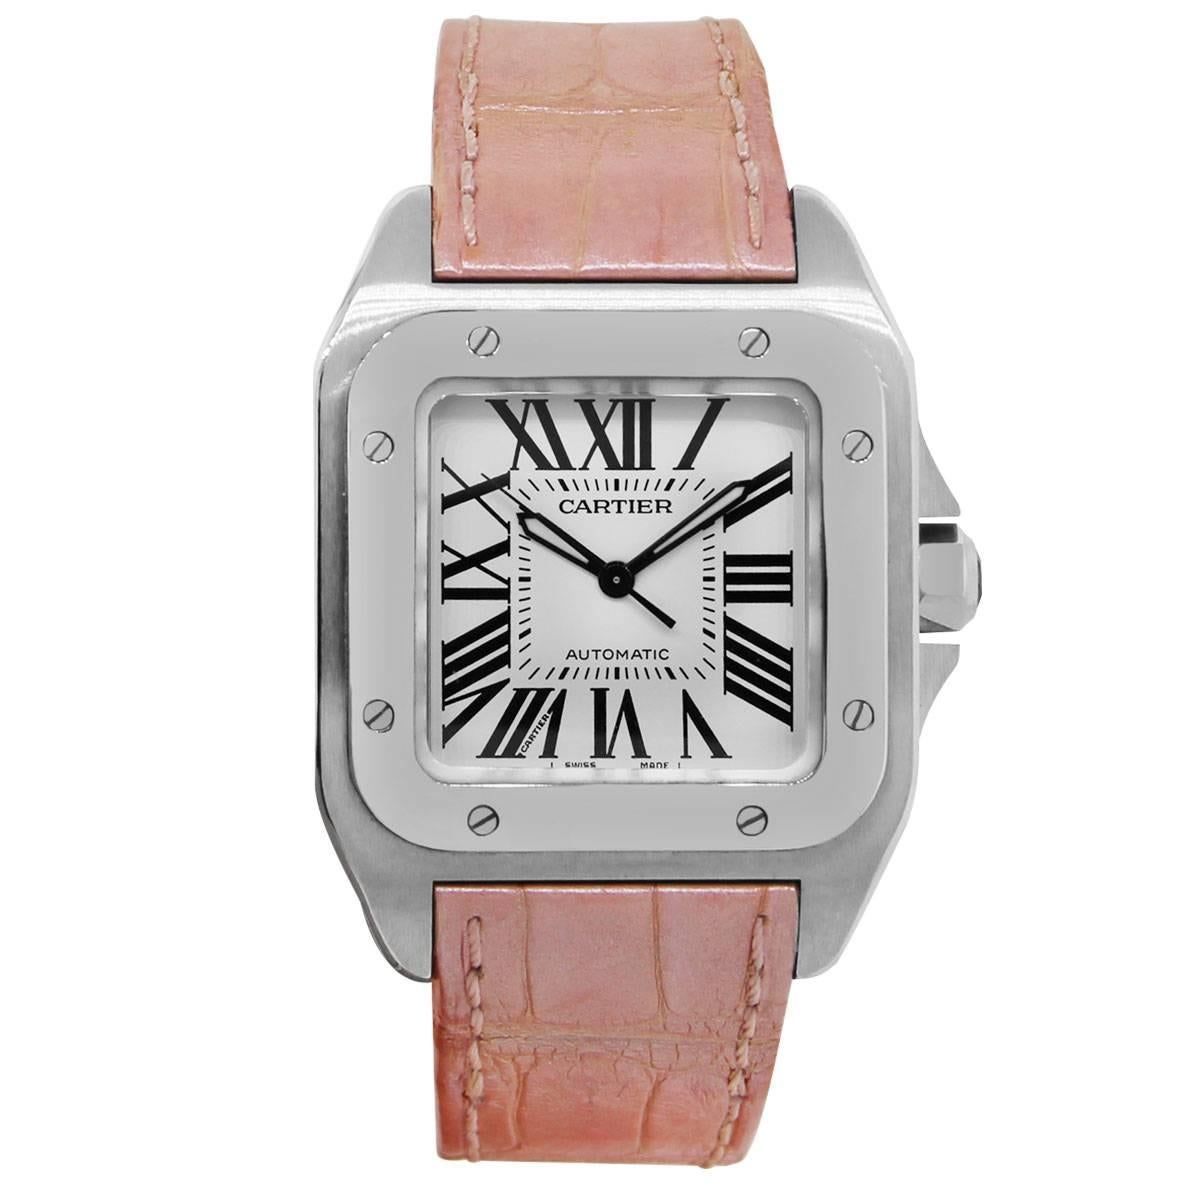 Brand: Cartier
MPN: 2878
Model: Santos
Case Material: Stainless steel
Case Diameter: 33mm
Crystal: Sapphire crystal
Bezel: Fixed smooth stainless steel bezel
Dial: Silvered dial with sword-shaped hands and Roman numerals hour markers. Minute markers